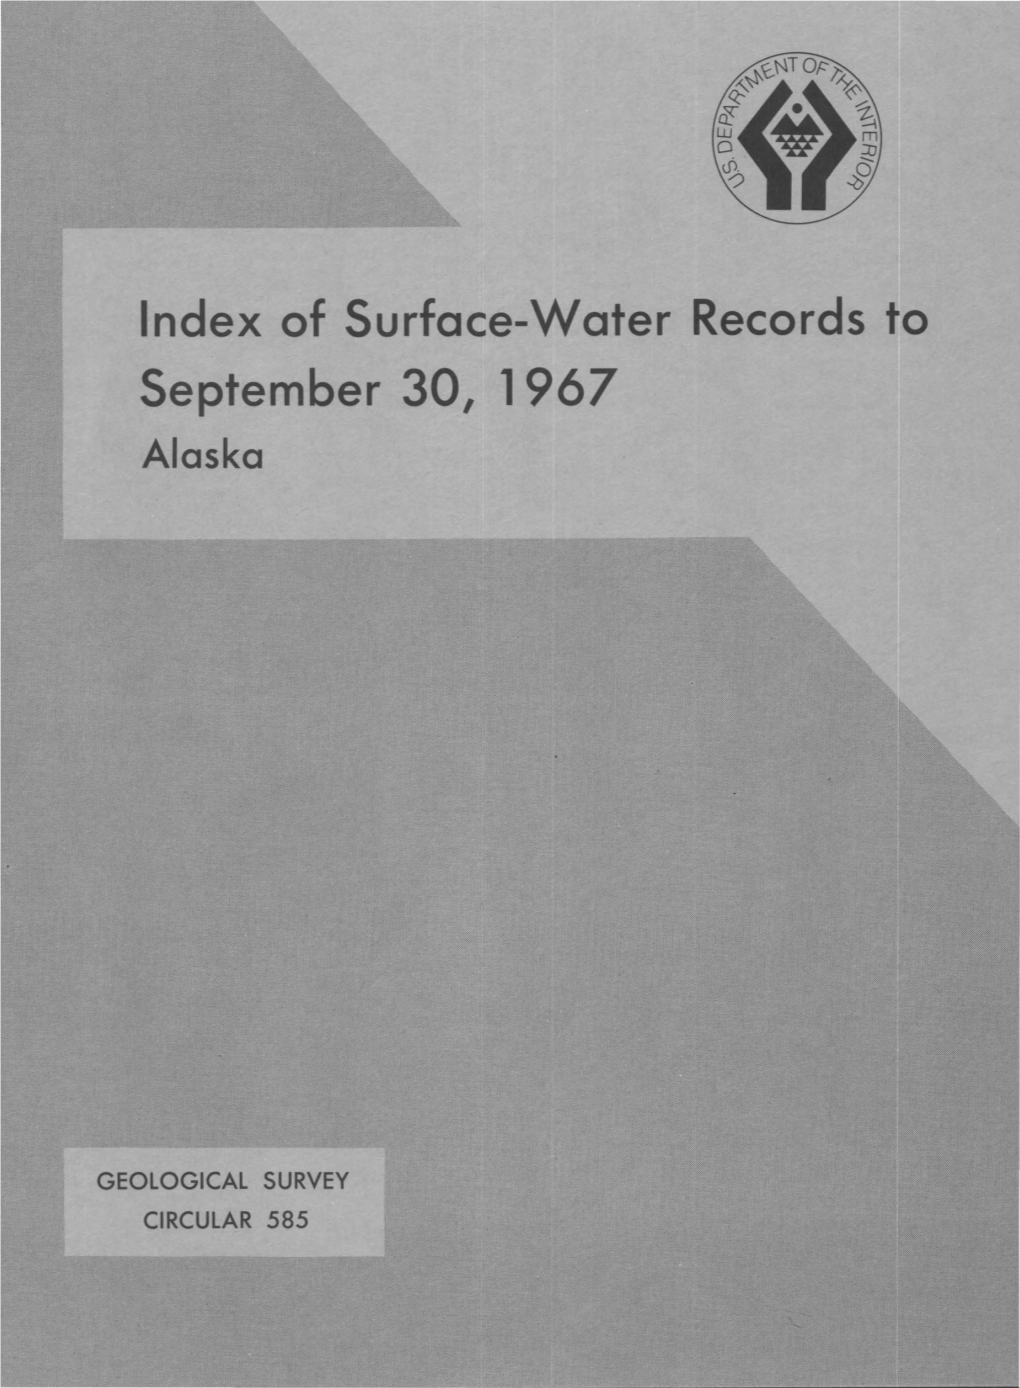 Index of Surface-Water Records to September 30, 1967 Alaska